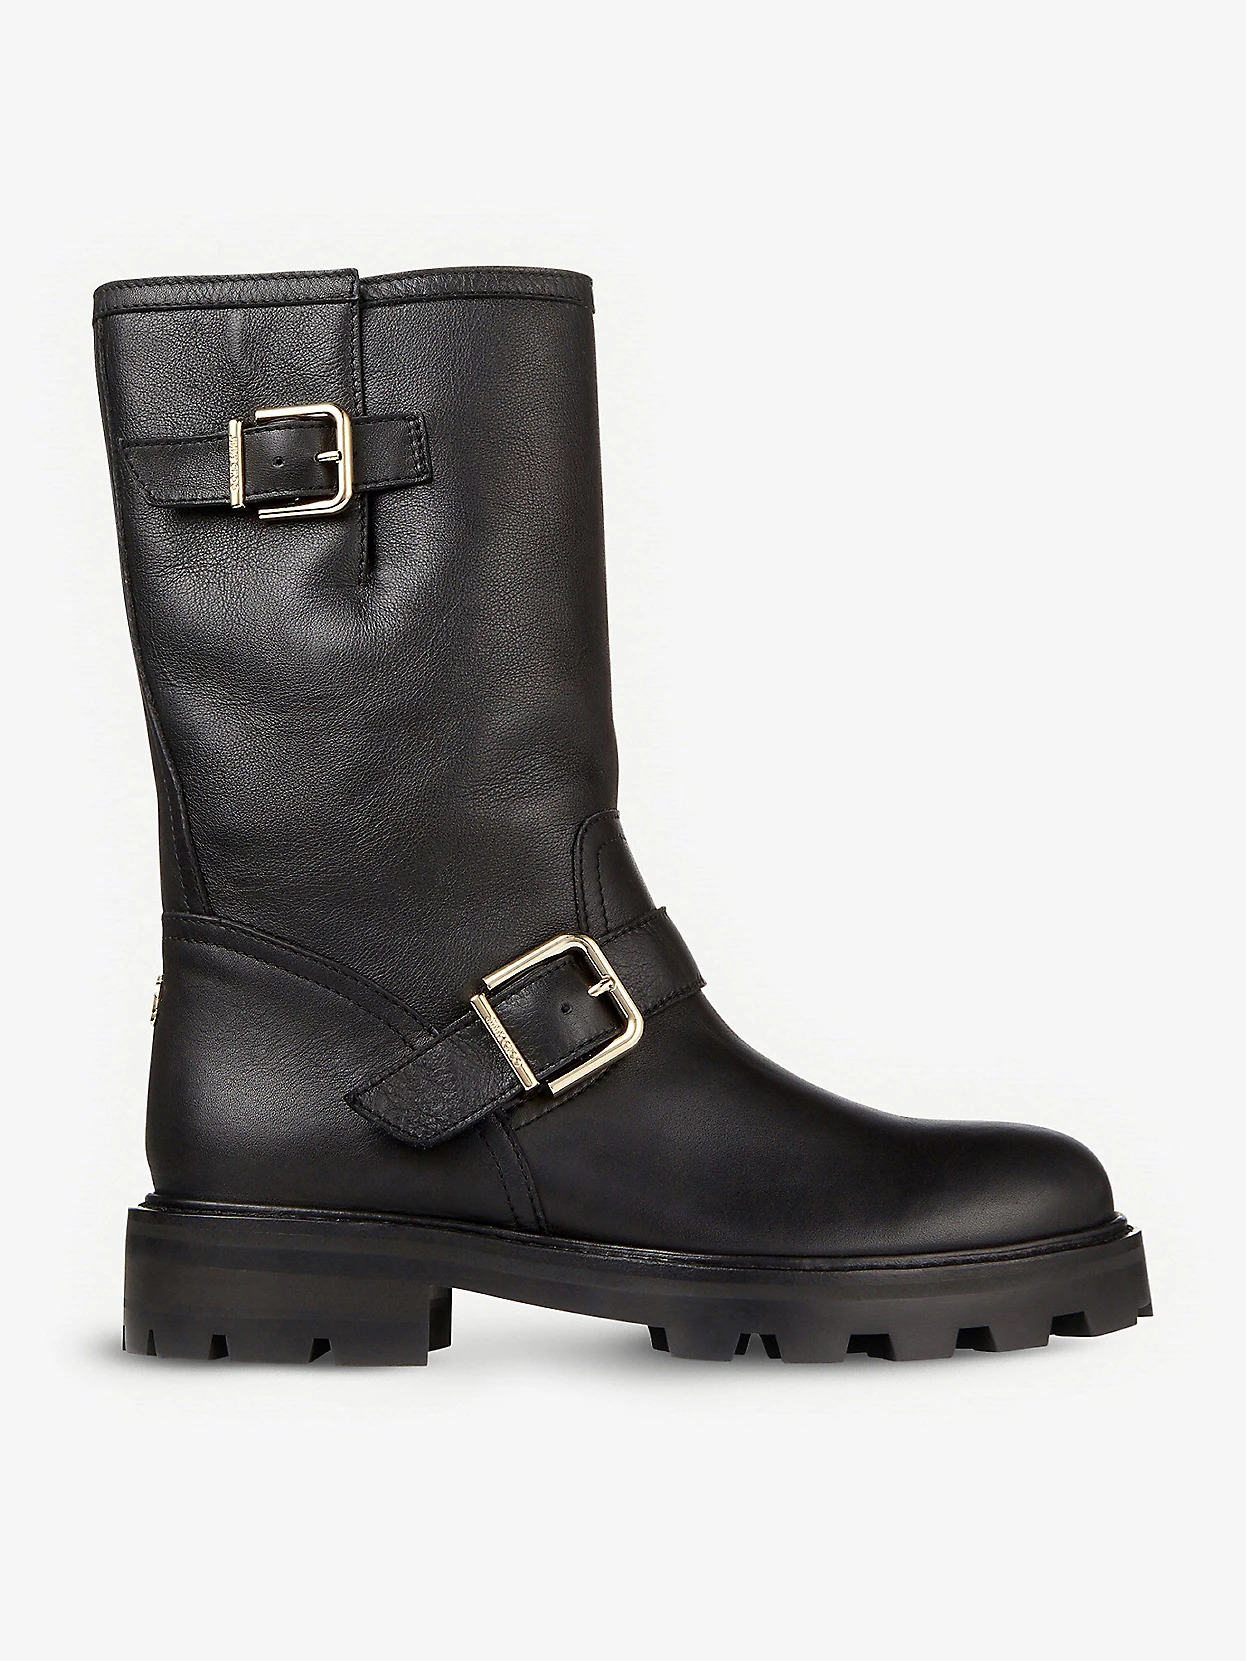 We've Found the Best Biker Boots, From Miu Miu to H&M | Who What Wear UK